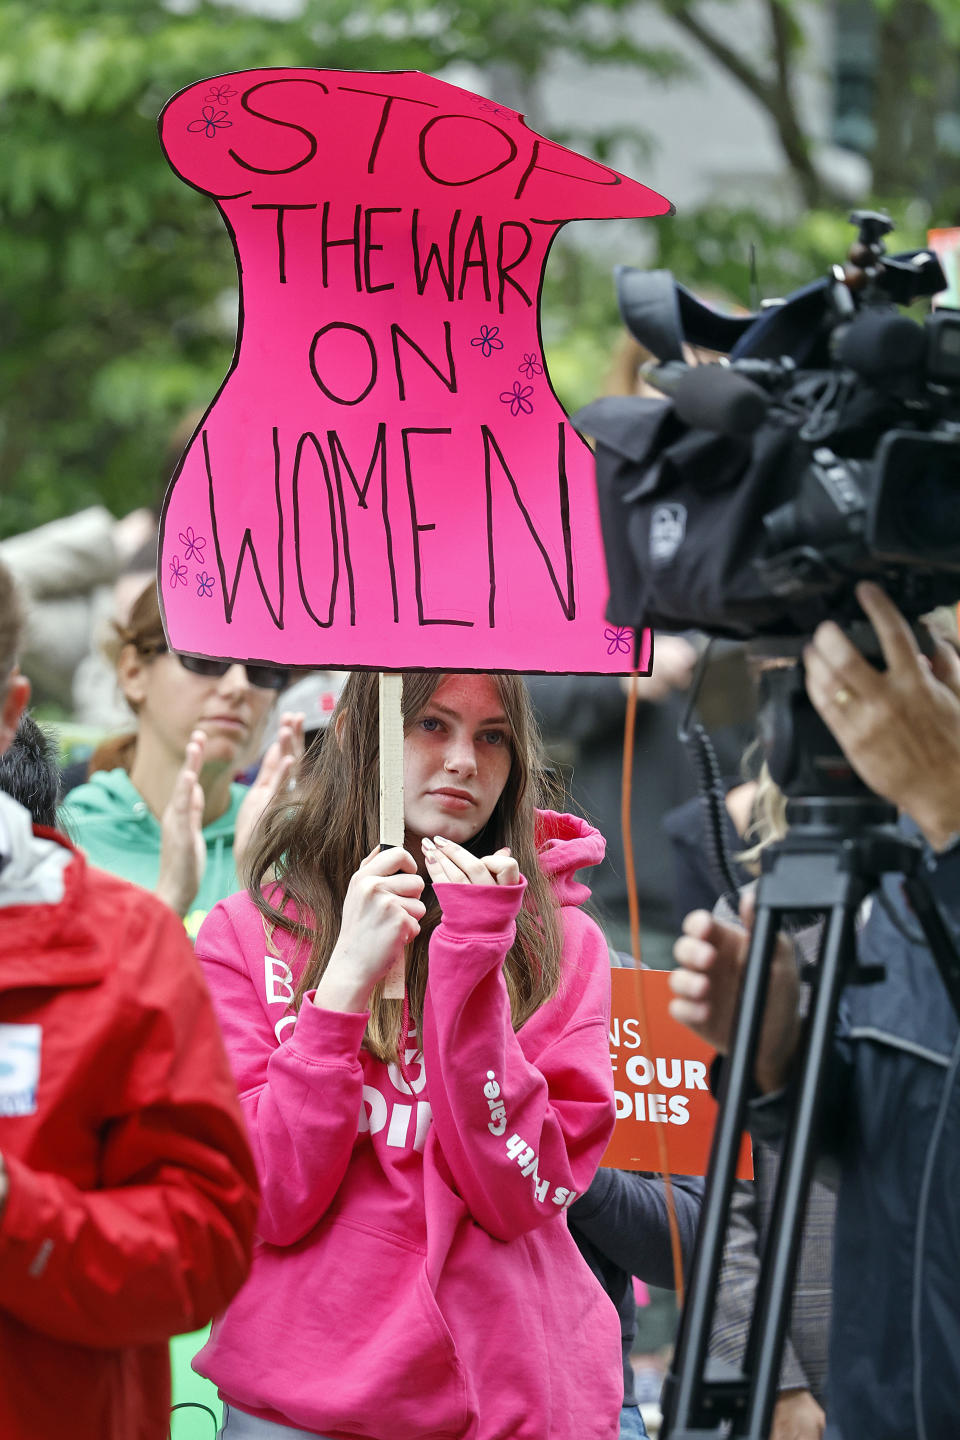 Cora Field, of Chapel Hill, NC, listens to speakers at a rally at Bicentennial Plaza put on by Planned Parenthood South Atlantic in response to a bill before the North Carolina Legislature, Wednesday, May 3, 2023, in Raleigh, N.C. (AP Photo/Karl B DeBlaker)